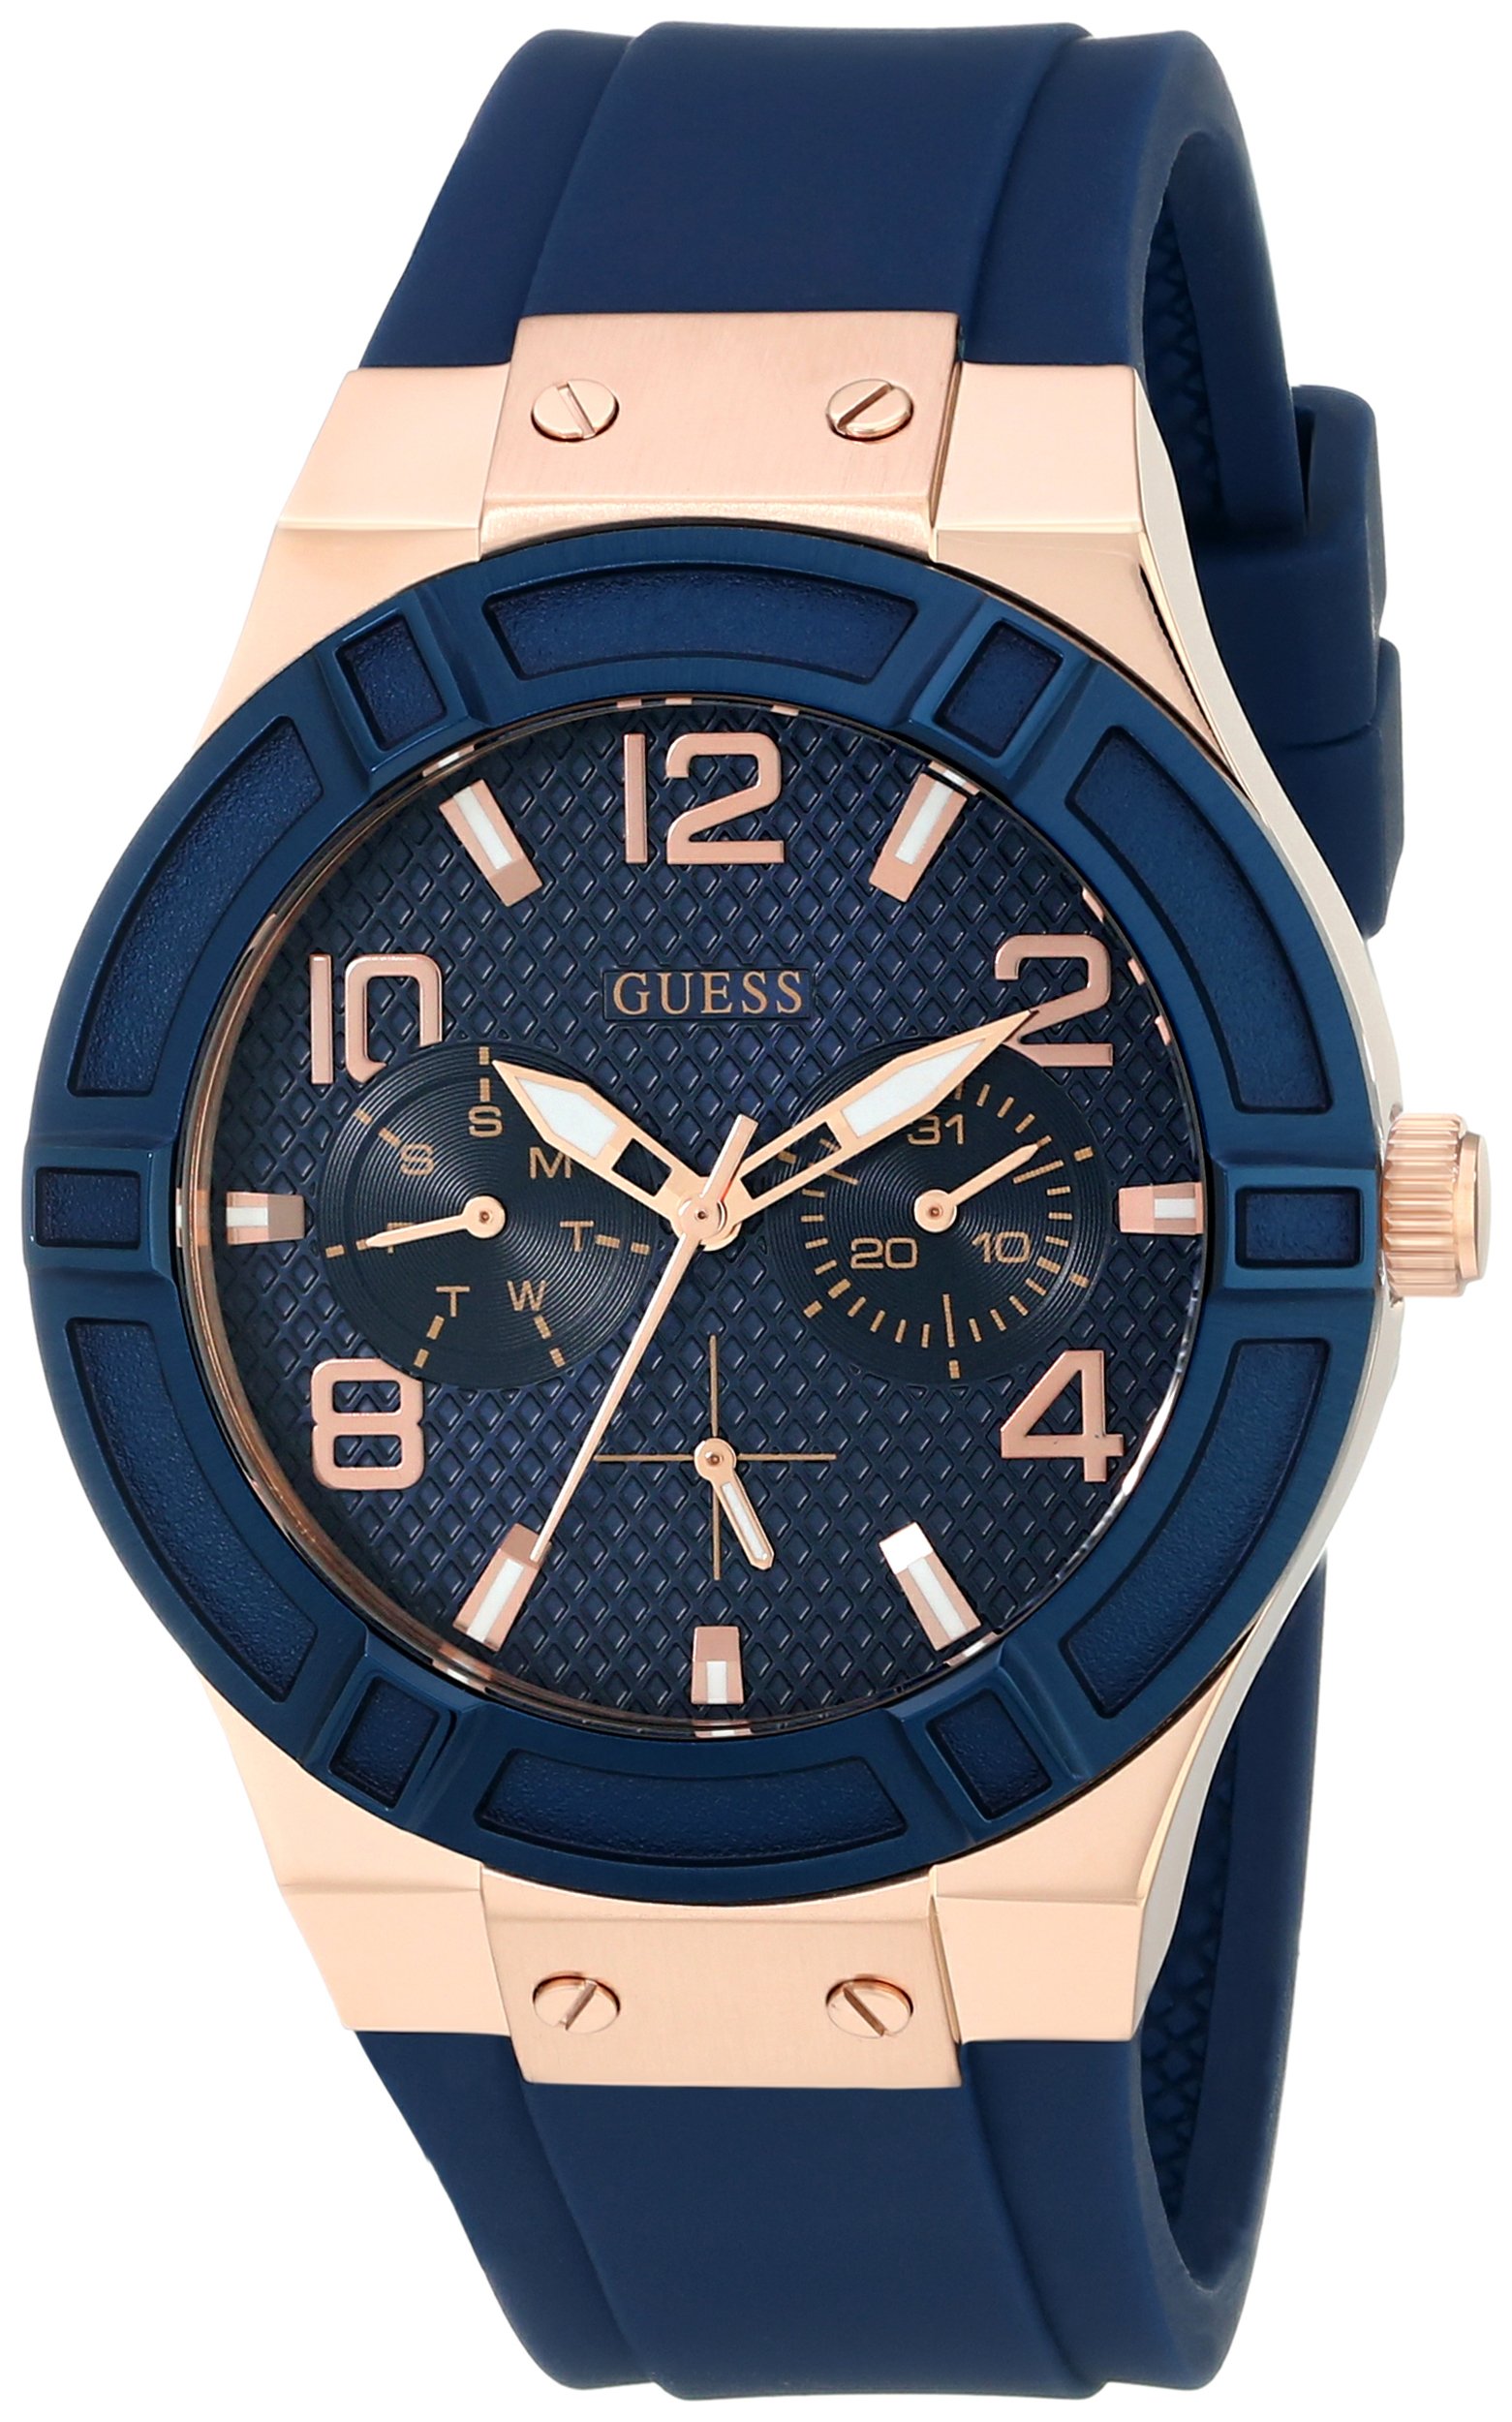 GUESS Women Stainless Steel Quartz Watch with Silicone Strap